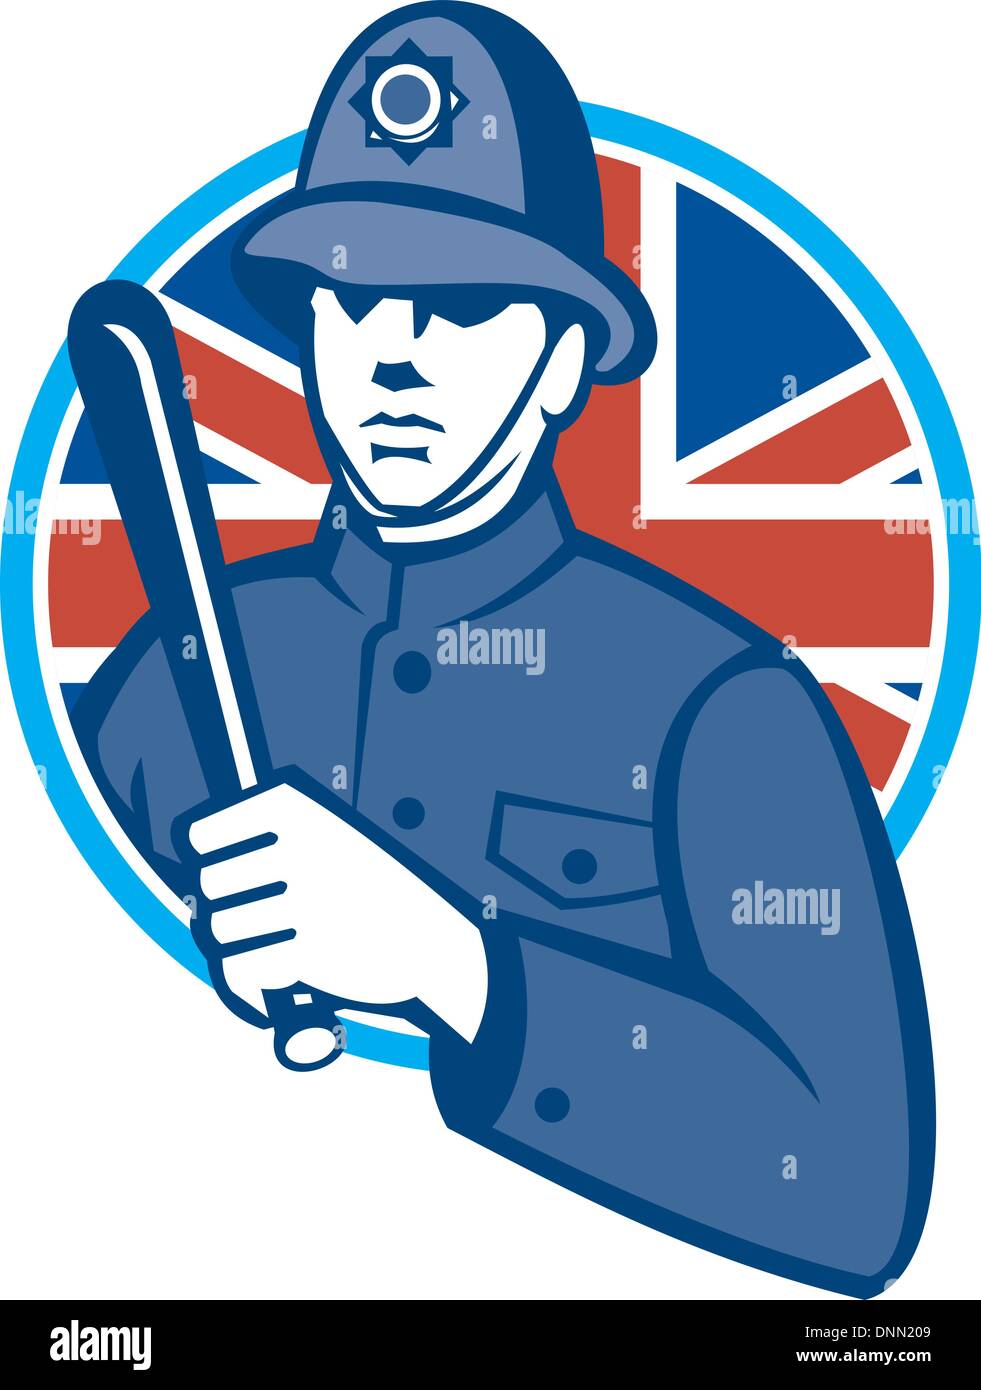 Illustration of a British London bobby police officer policeman man wielding truncheon or baton also called cosh, billystick, billy club, nightstick, sap, stick set inside circle with Union Jack flag in background retro style. Stock Vector